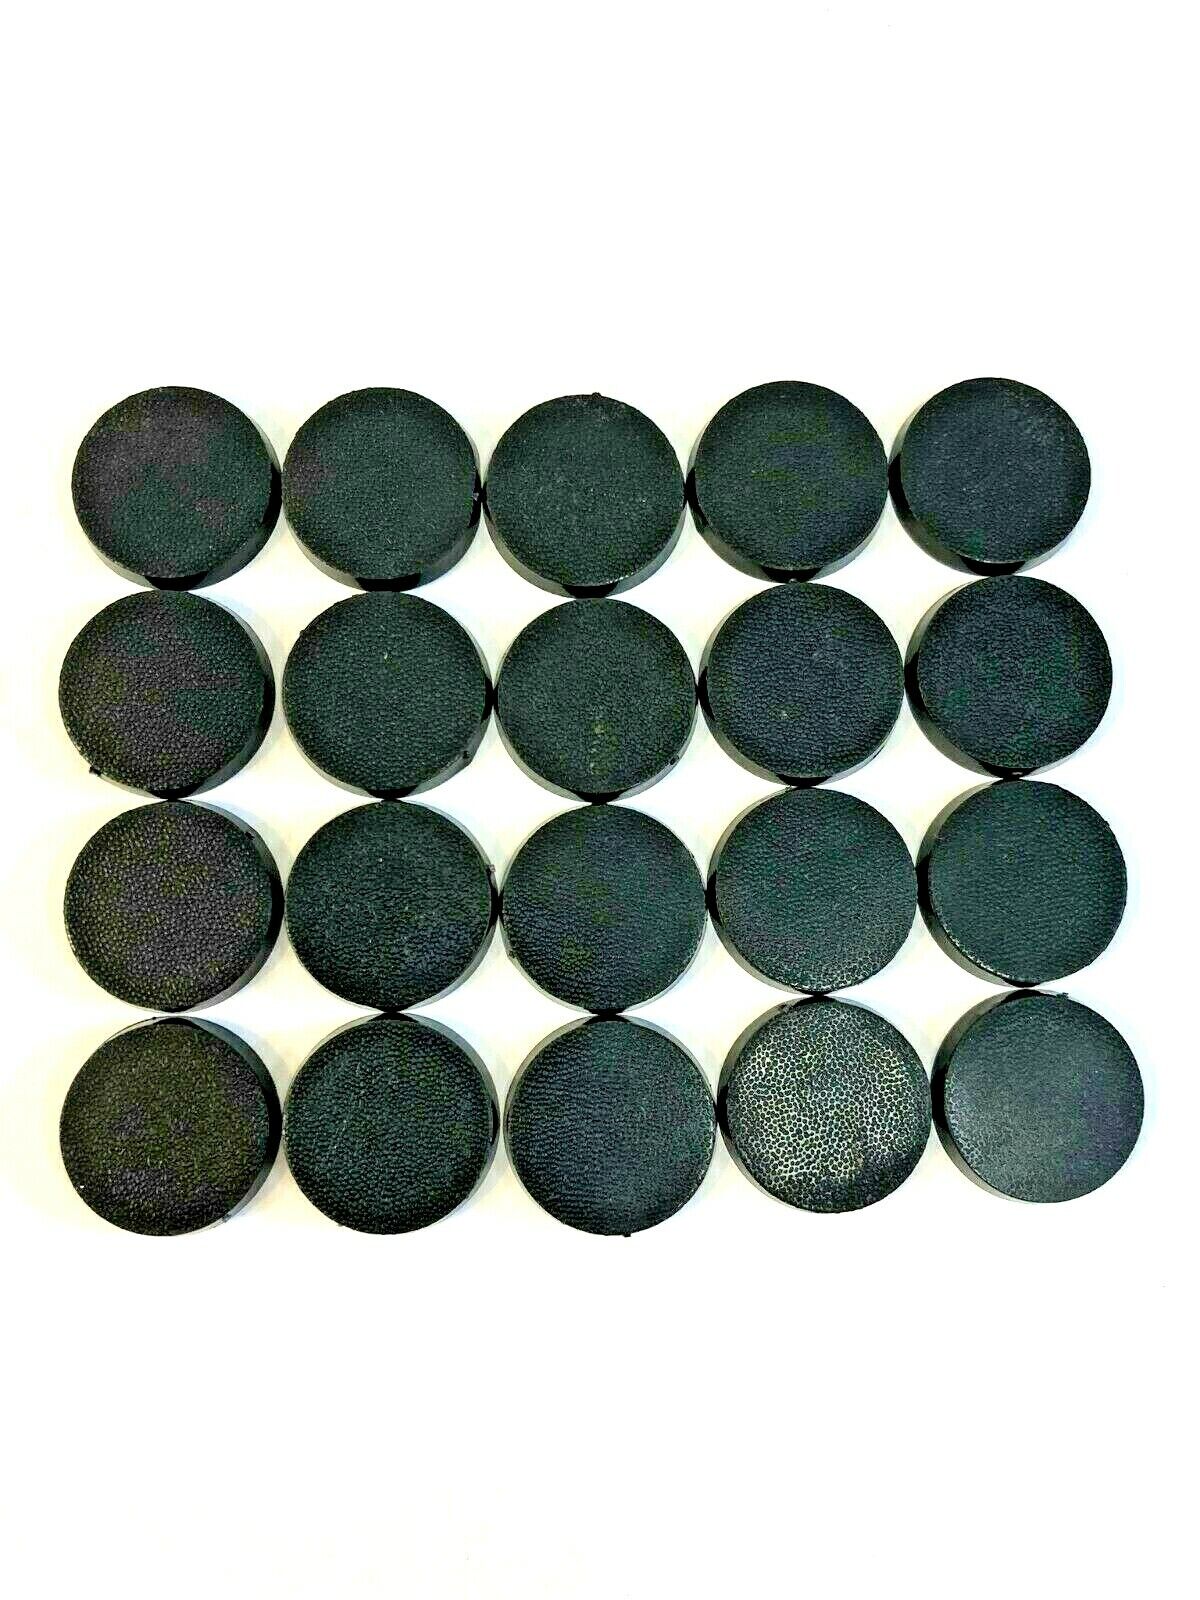 Lot Of 20 25mm Round Bases For Warhammer 40k & AoS Games Workshop Bitz  Unbranded Does not Apply